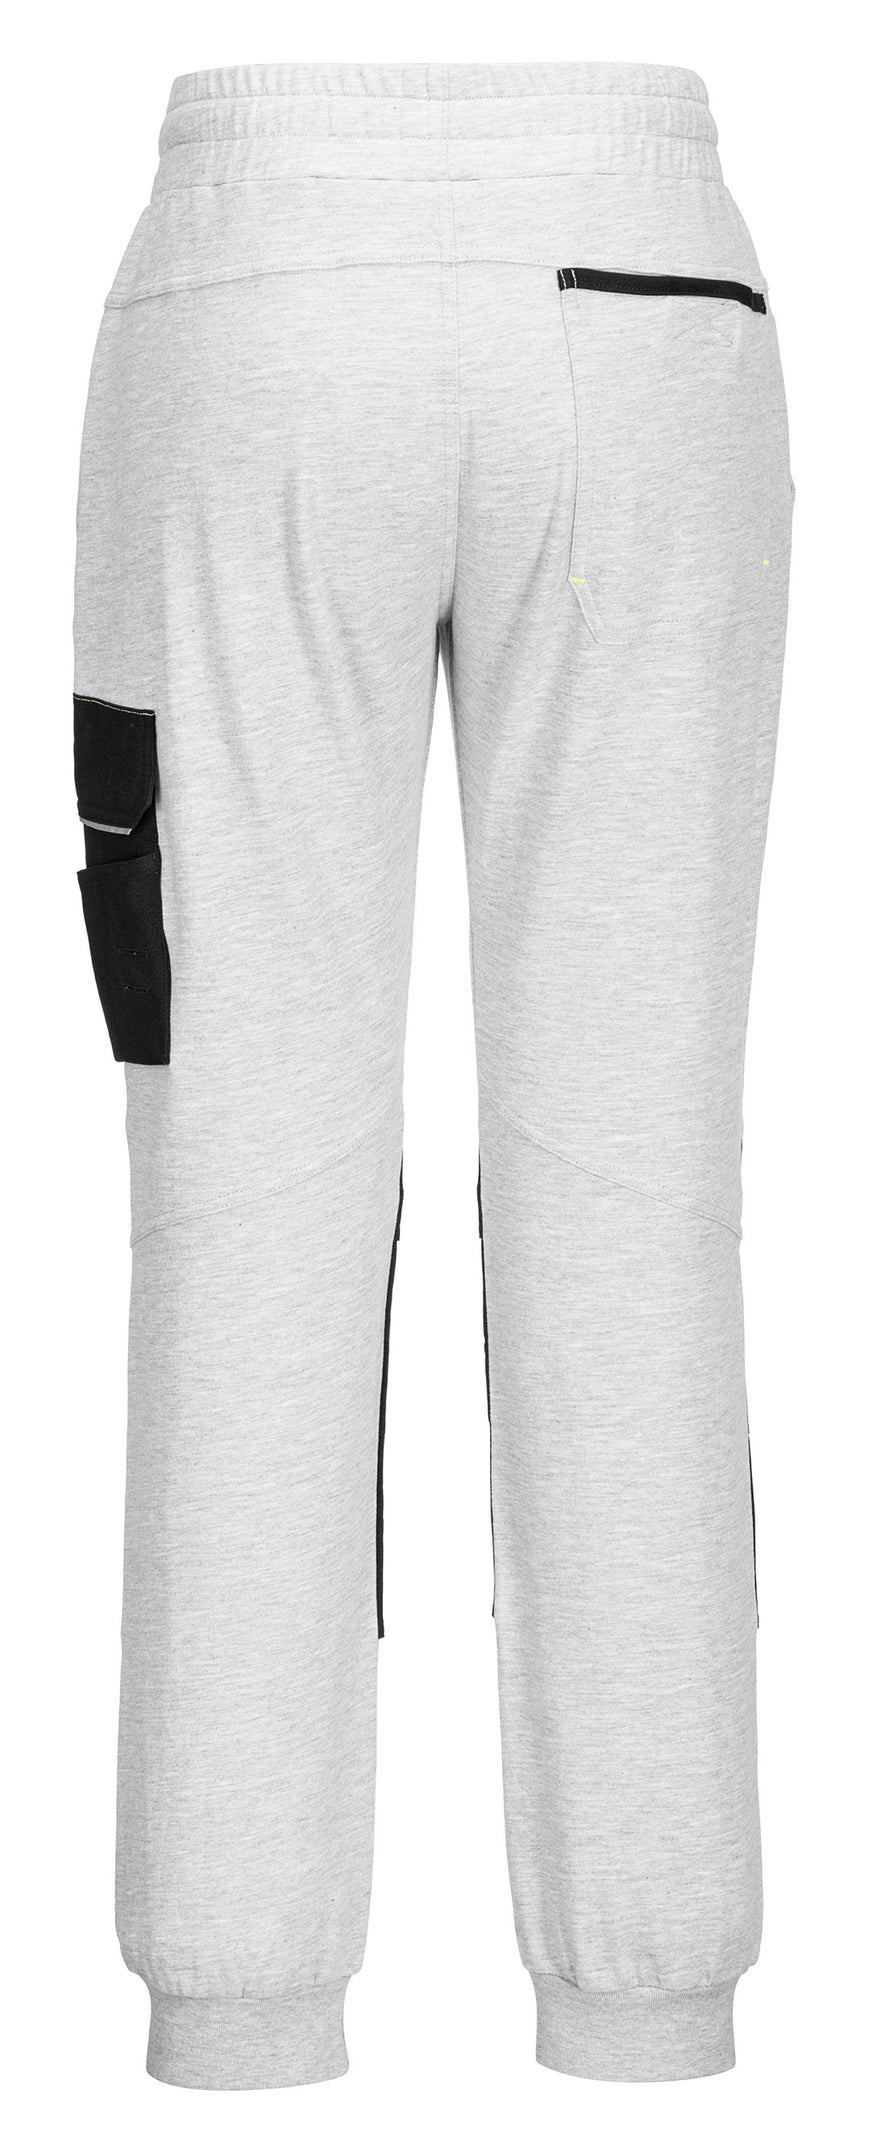 Back of Portwest PW3 Work Jogger in heather grey with elasticated waist band and pockets on back and black pocket on side of leg.